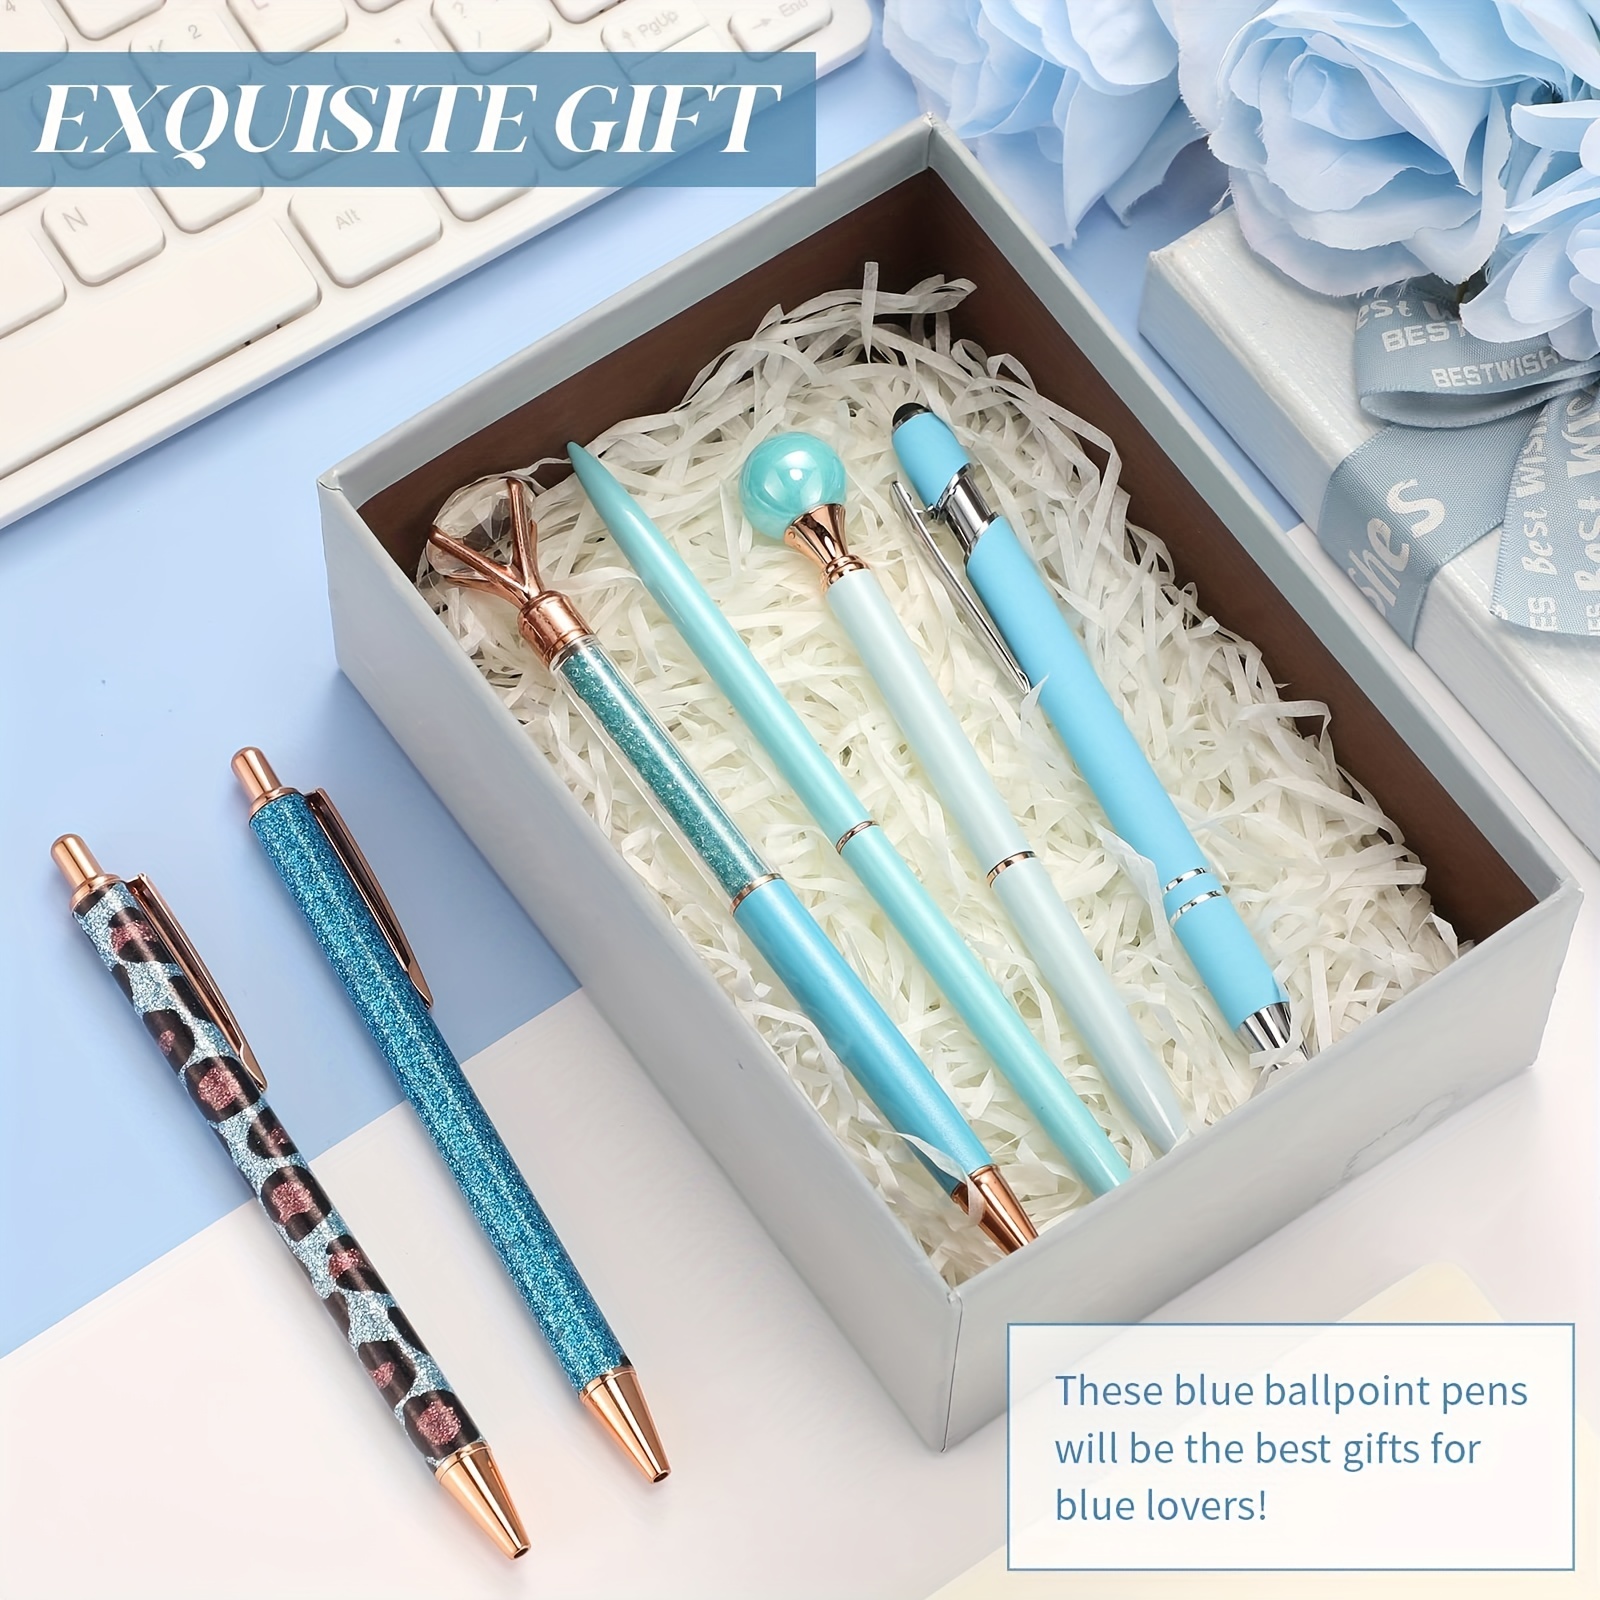 Teacher Pen Set – Turquoise and Tequila